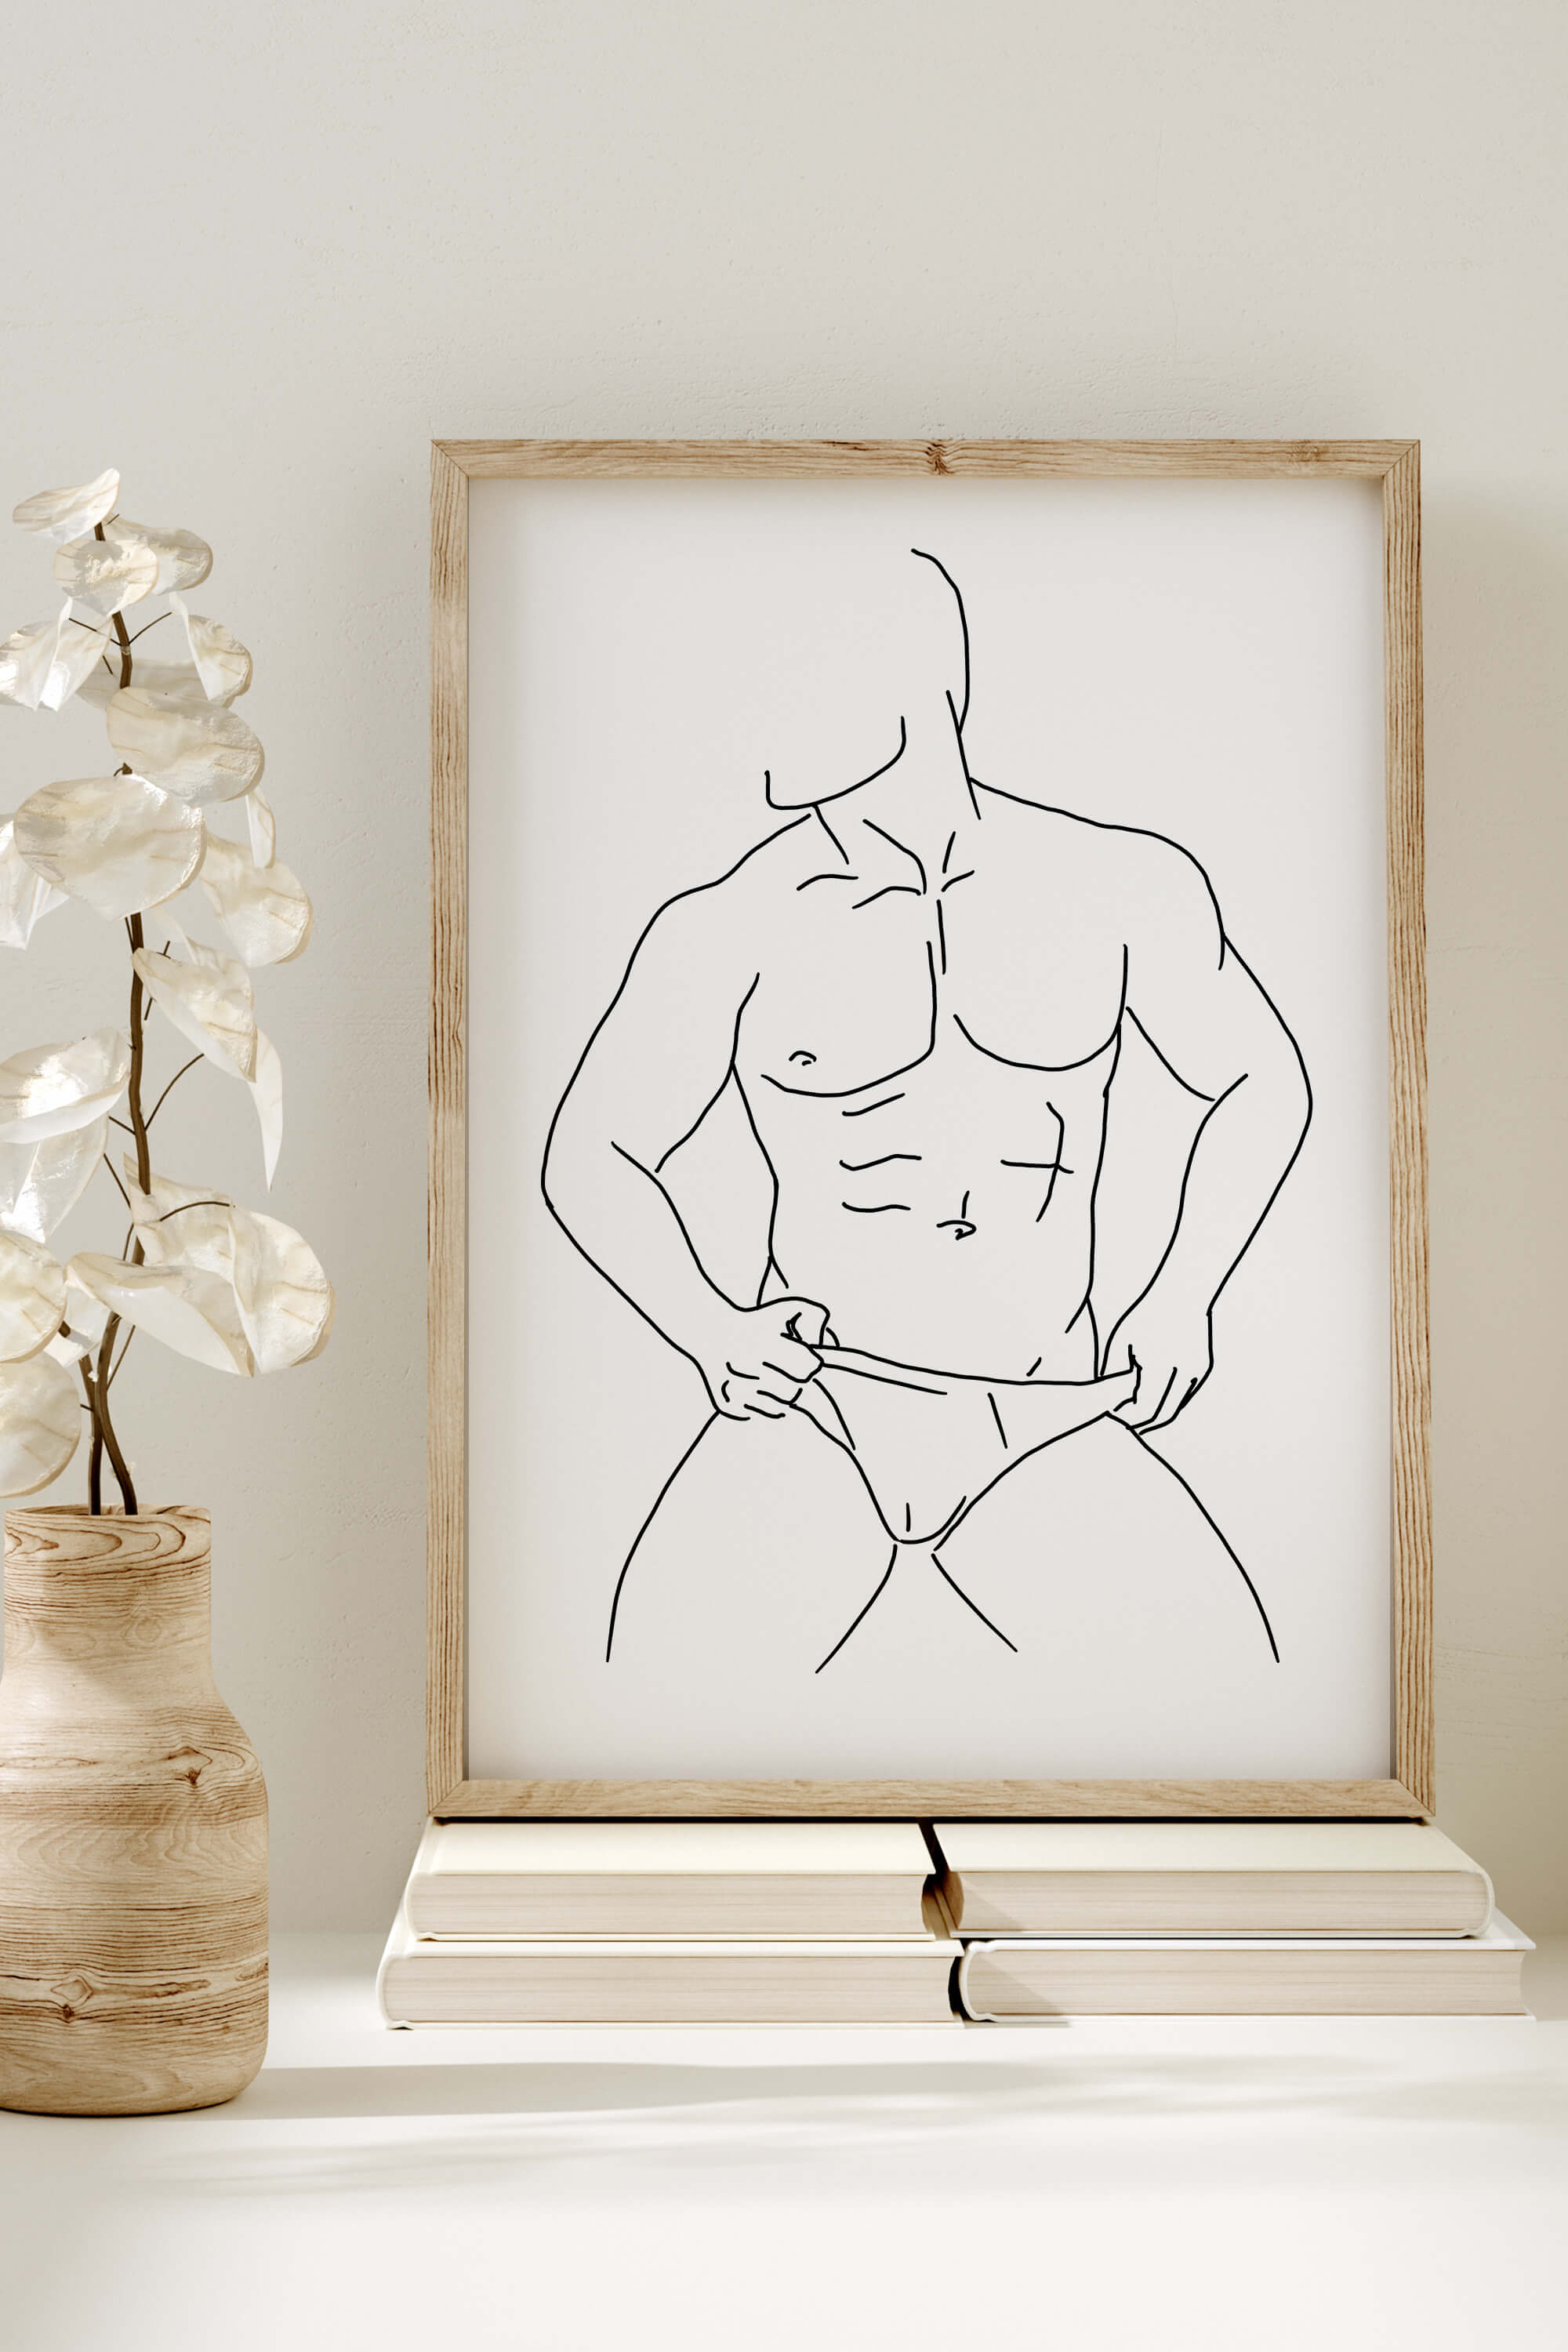 Immerse yourself in the passionate artistry of this monochrome print featuring a male nude model. Each line tells a story of desire and artistic brilliance, creating a visual masterpiece.